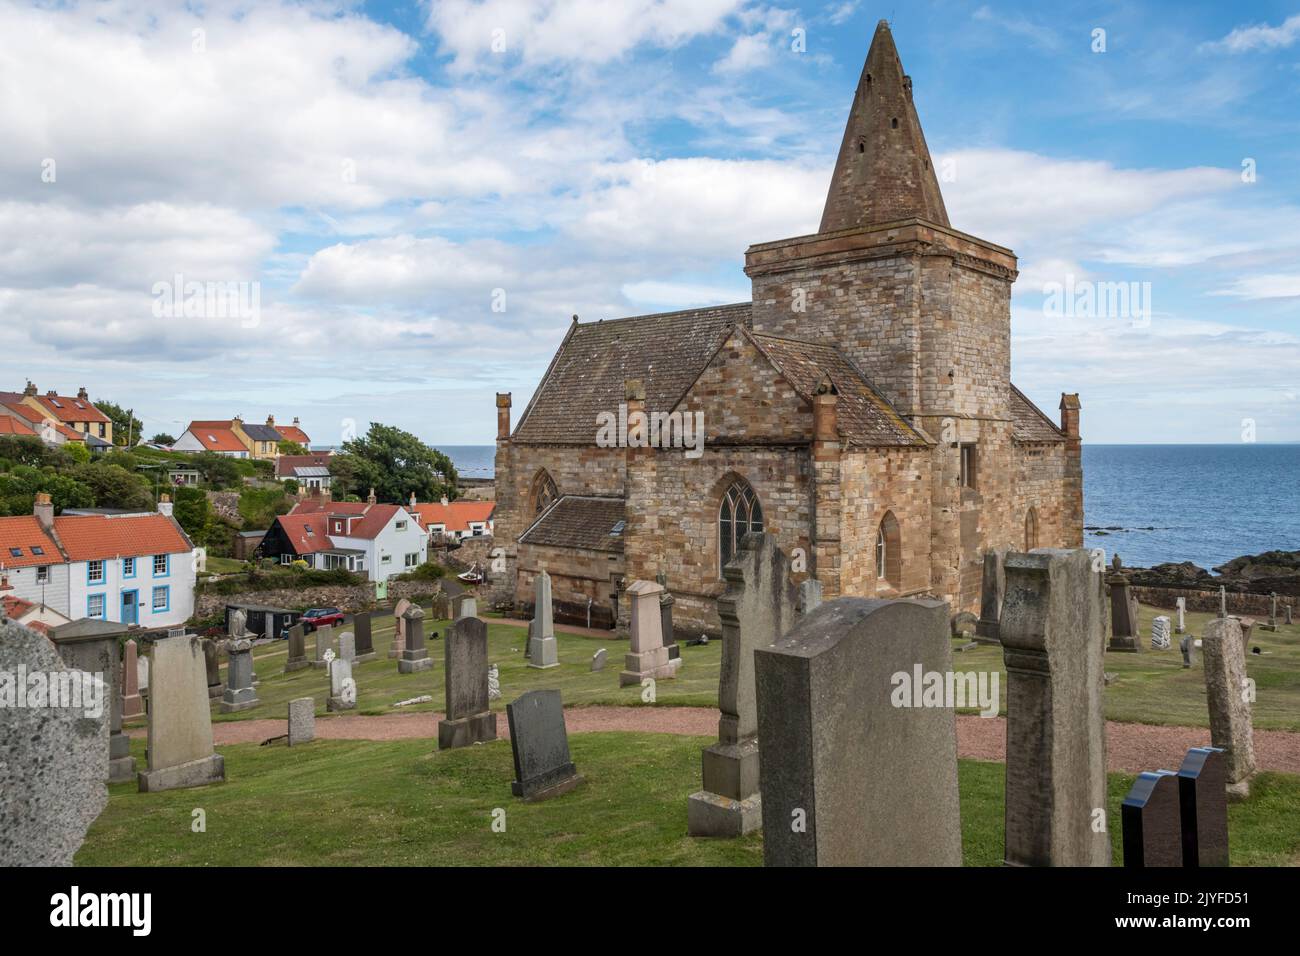 St Monans church on the edge of the village of St Monans in the East Neuk of Fife, Scotland. Stock Photo